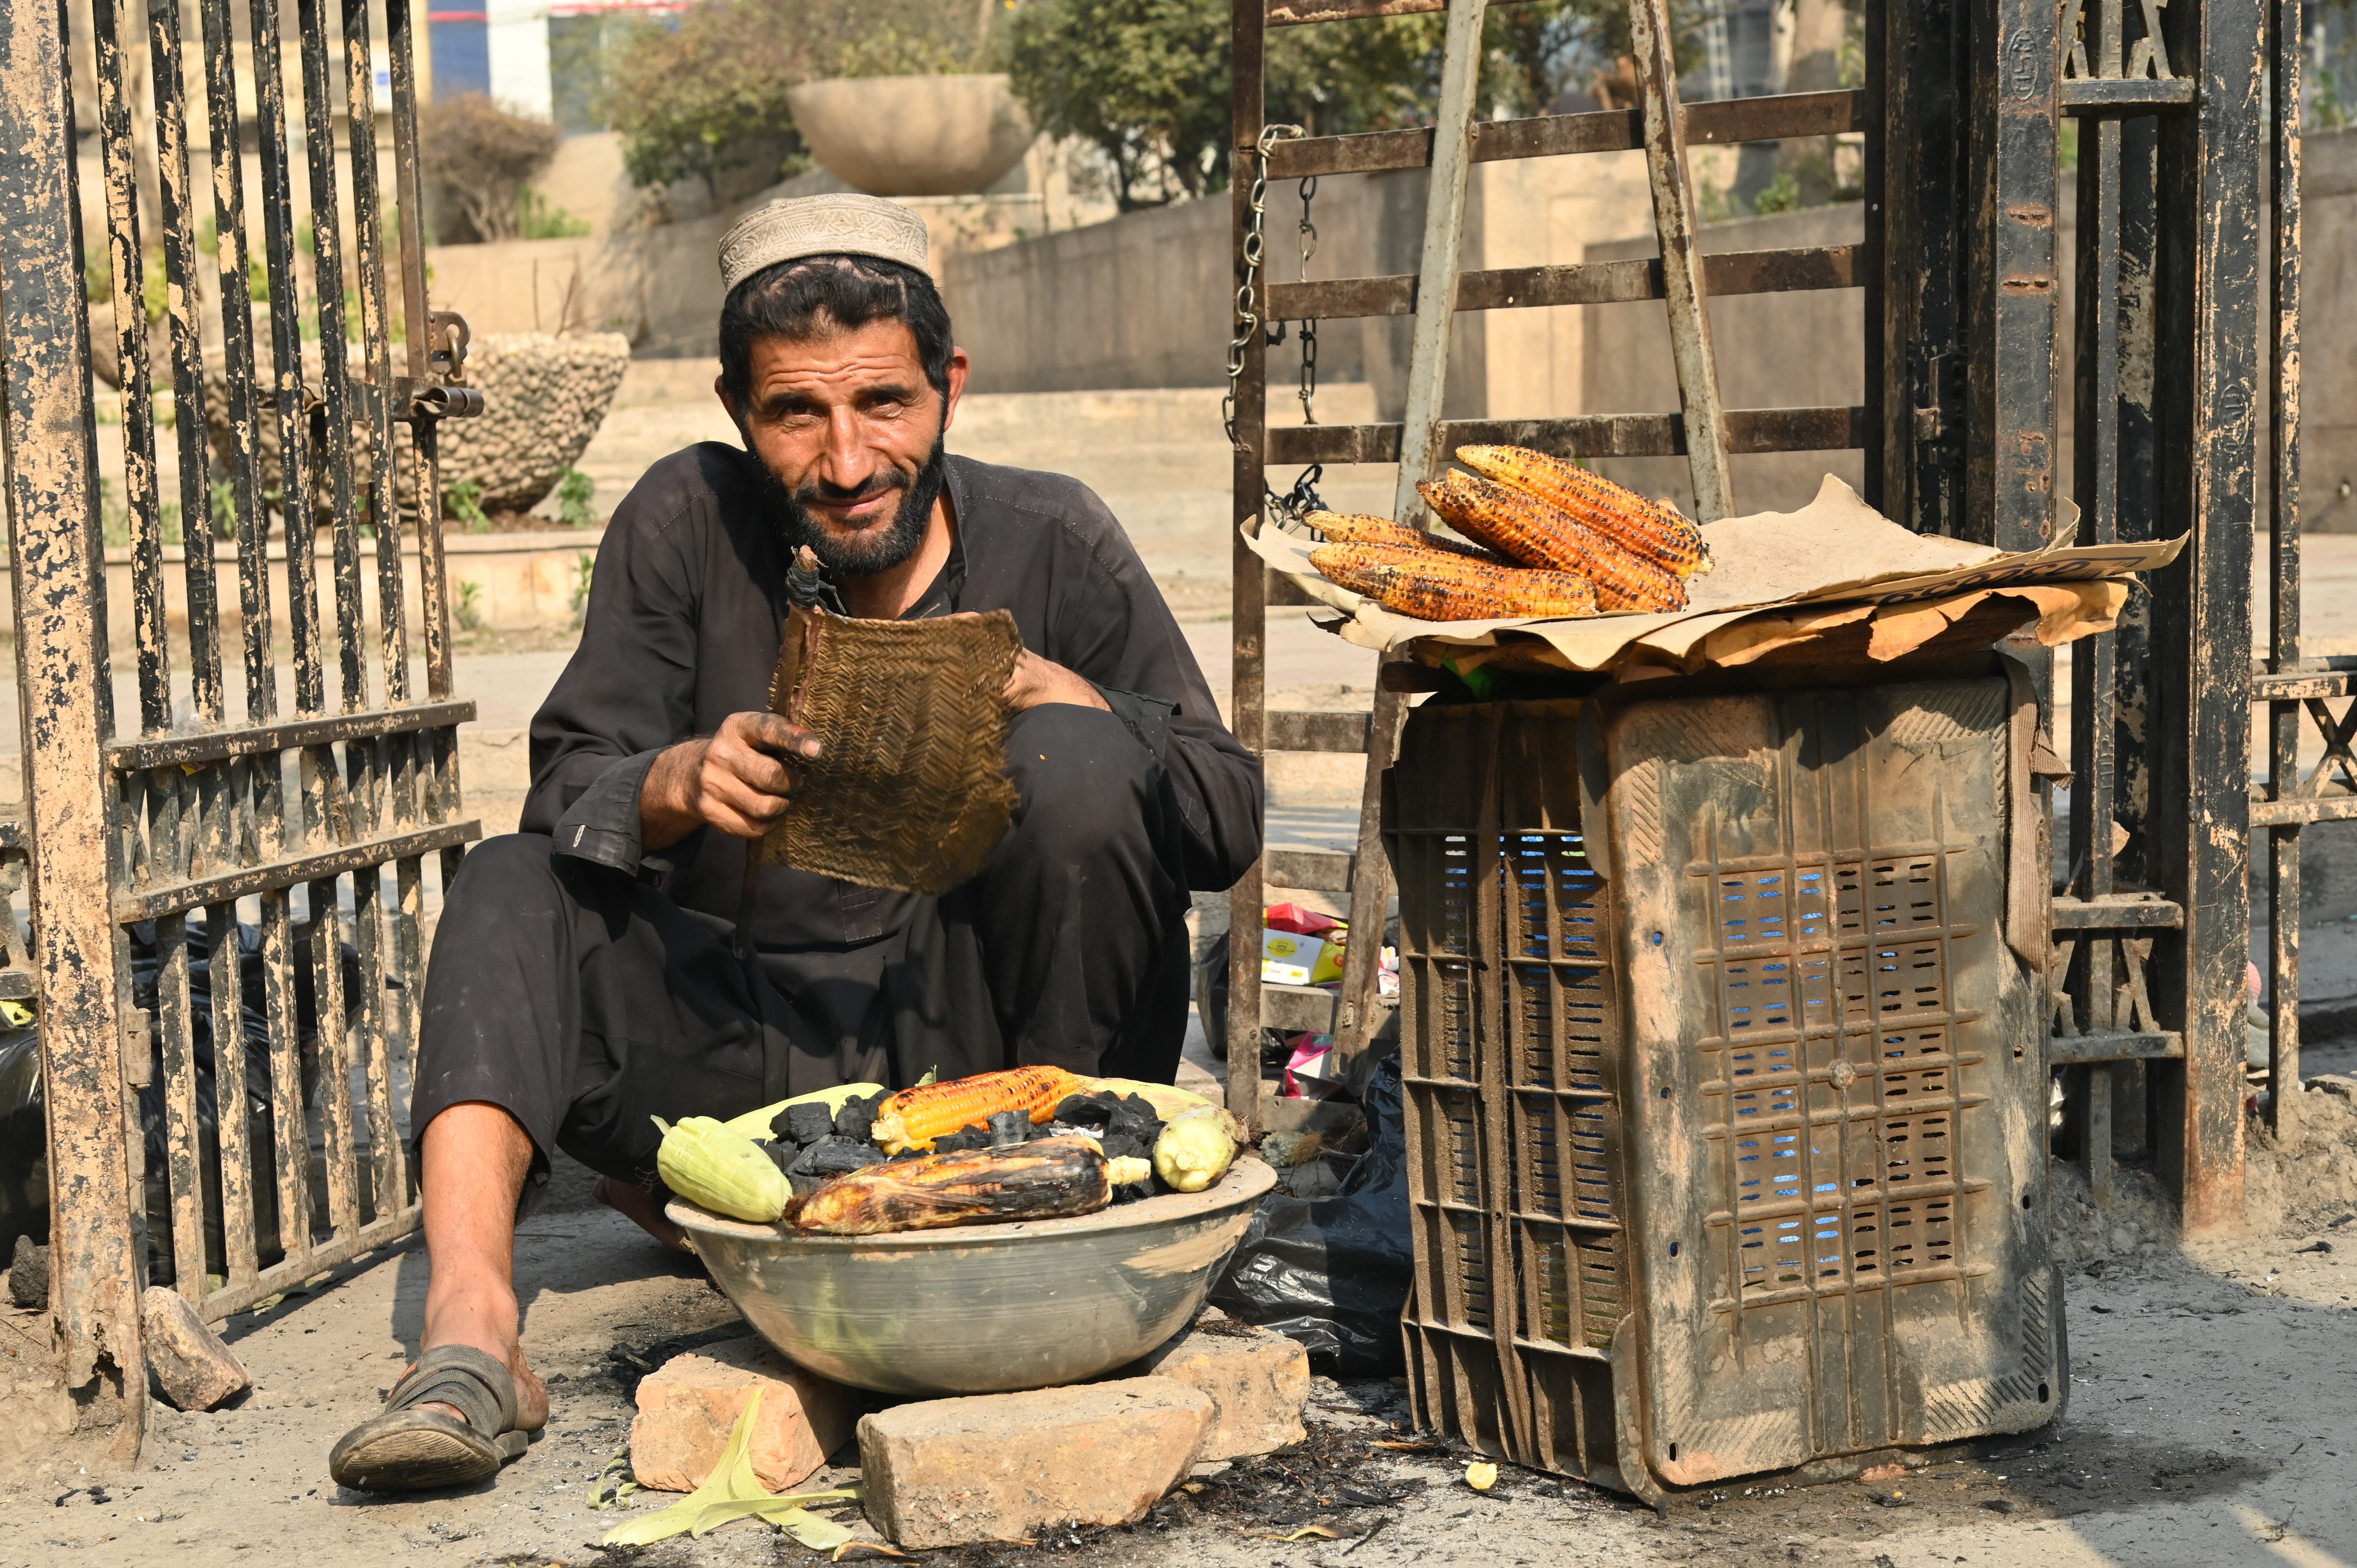 A man selling roasted Corn